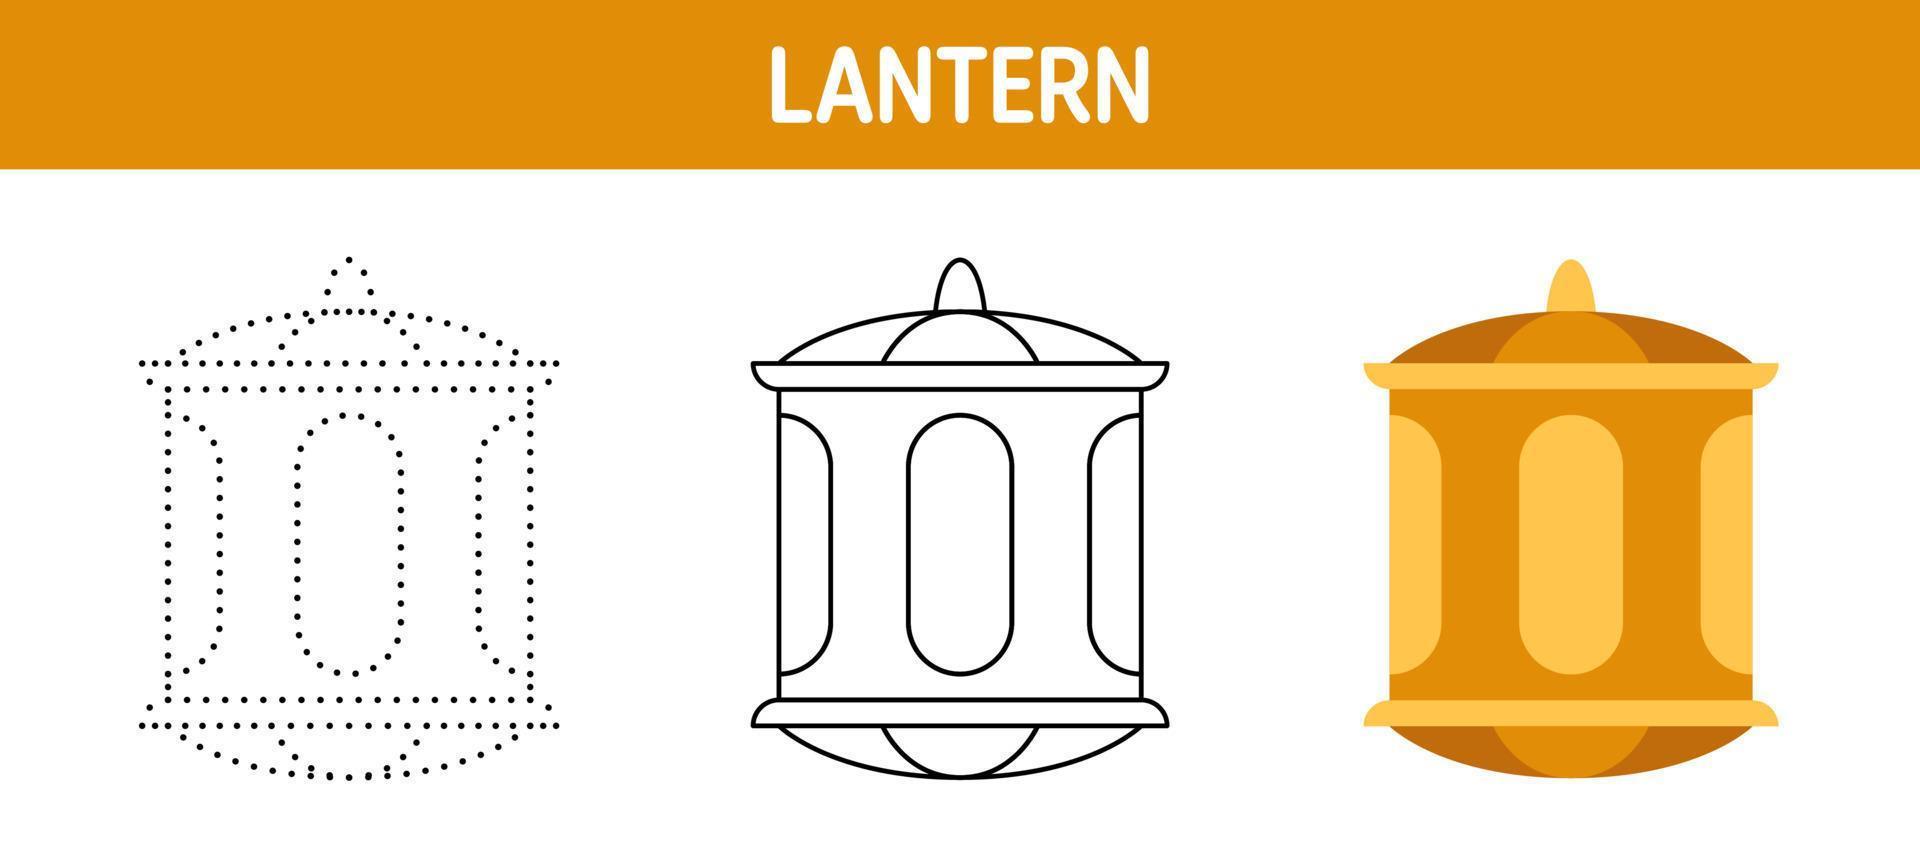 Lantern Coin tracing and coloring worksheet for kids vector